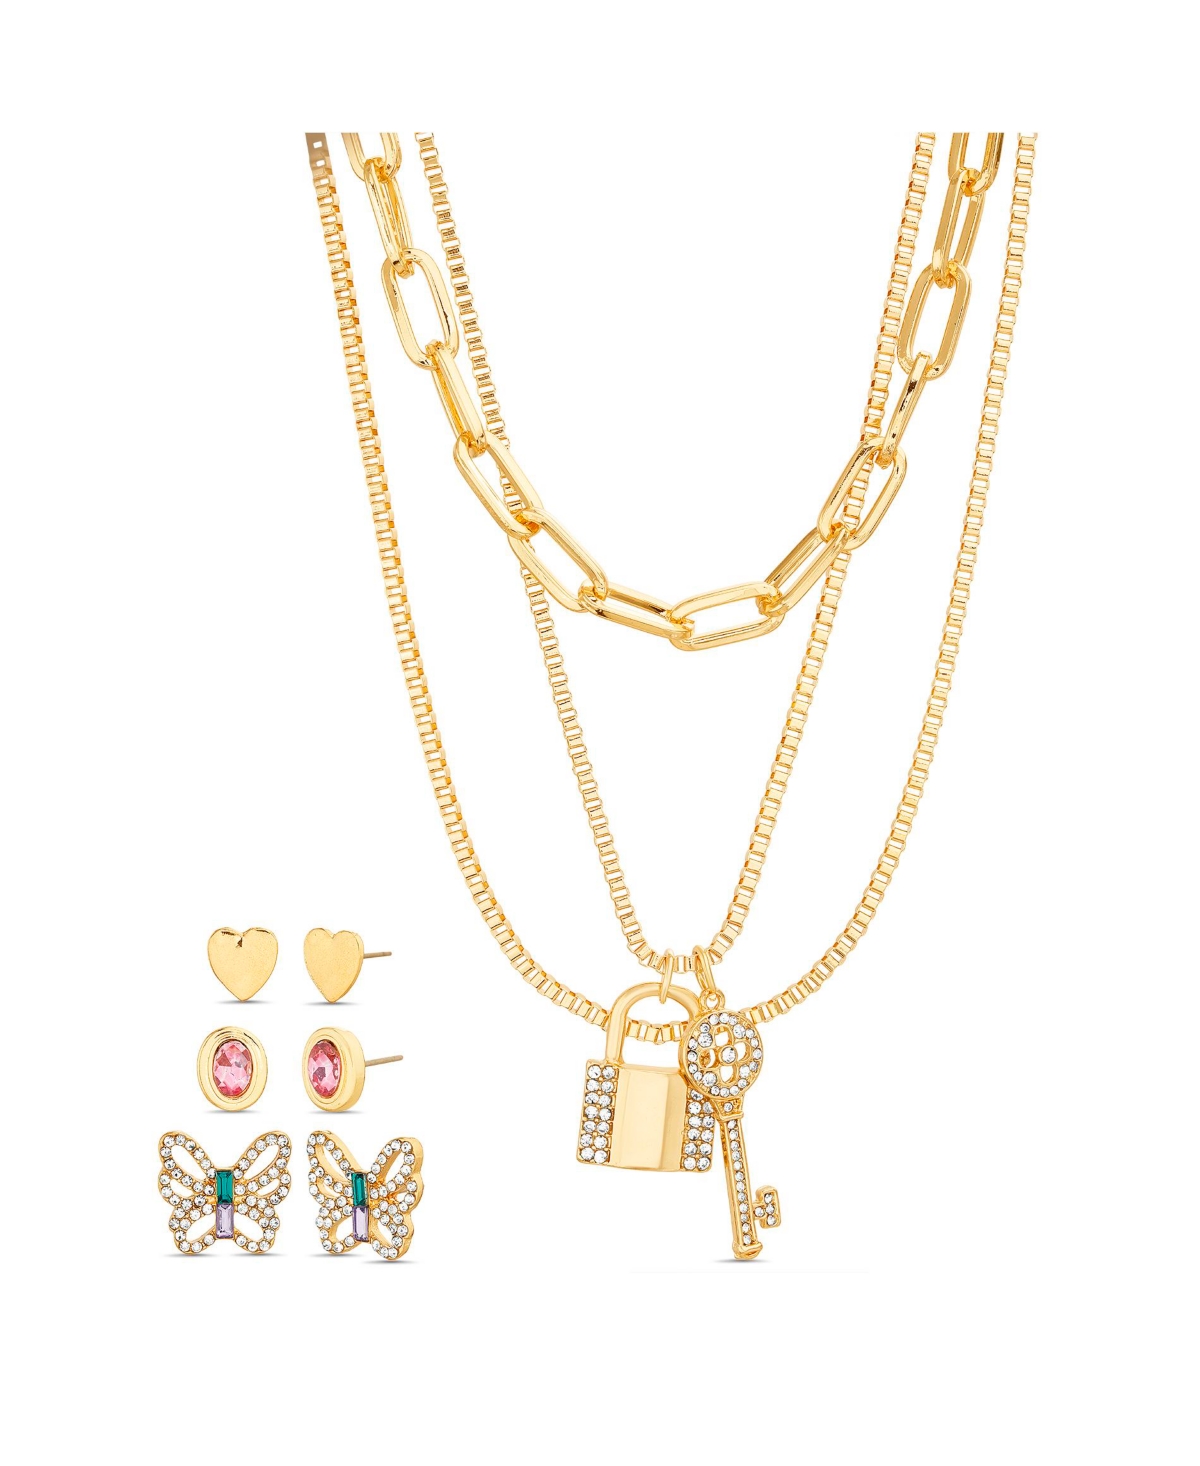 Gold-Tone 3-Row Necklace with Key and Lock Pendants and 3 Pair of Earrings Set - Gold